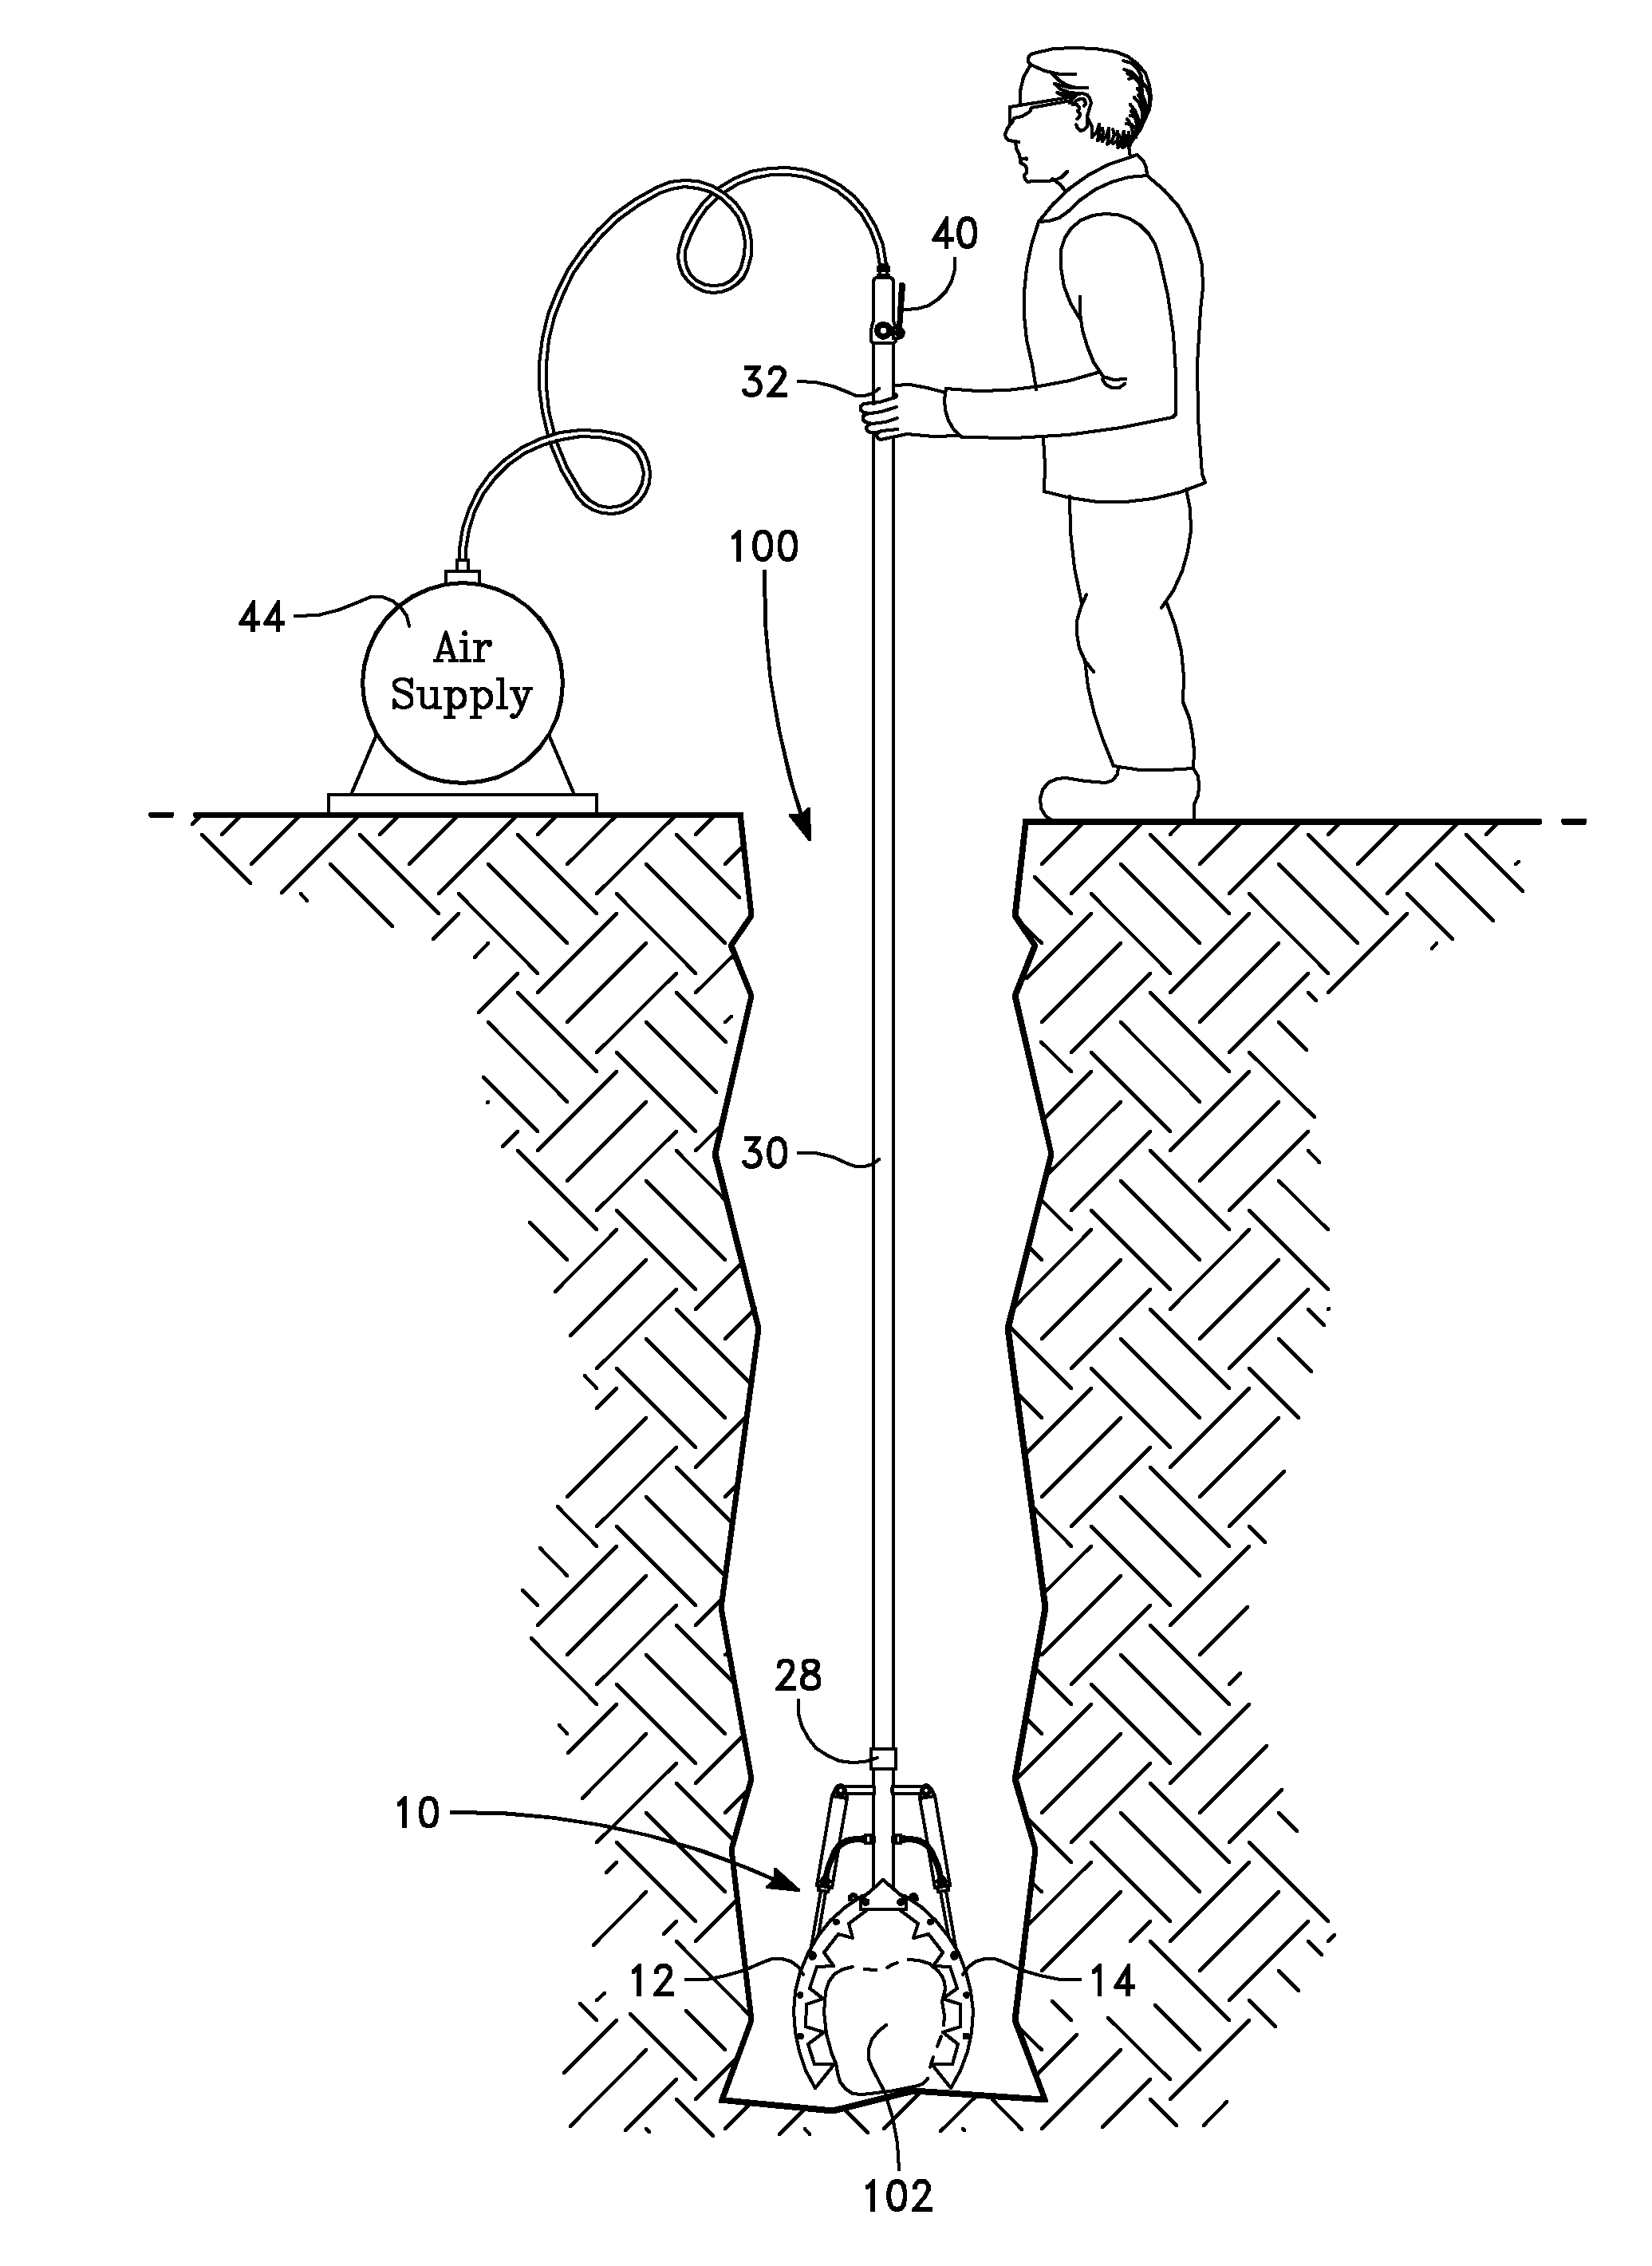 Rock grasping and removal apparatus